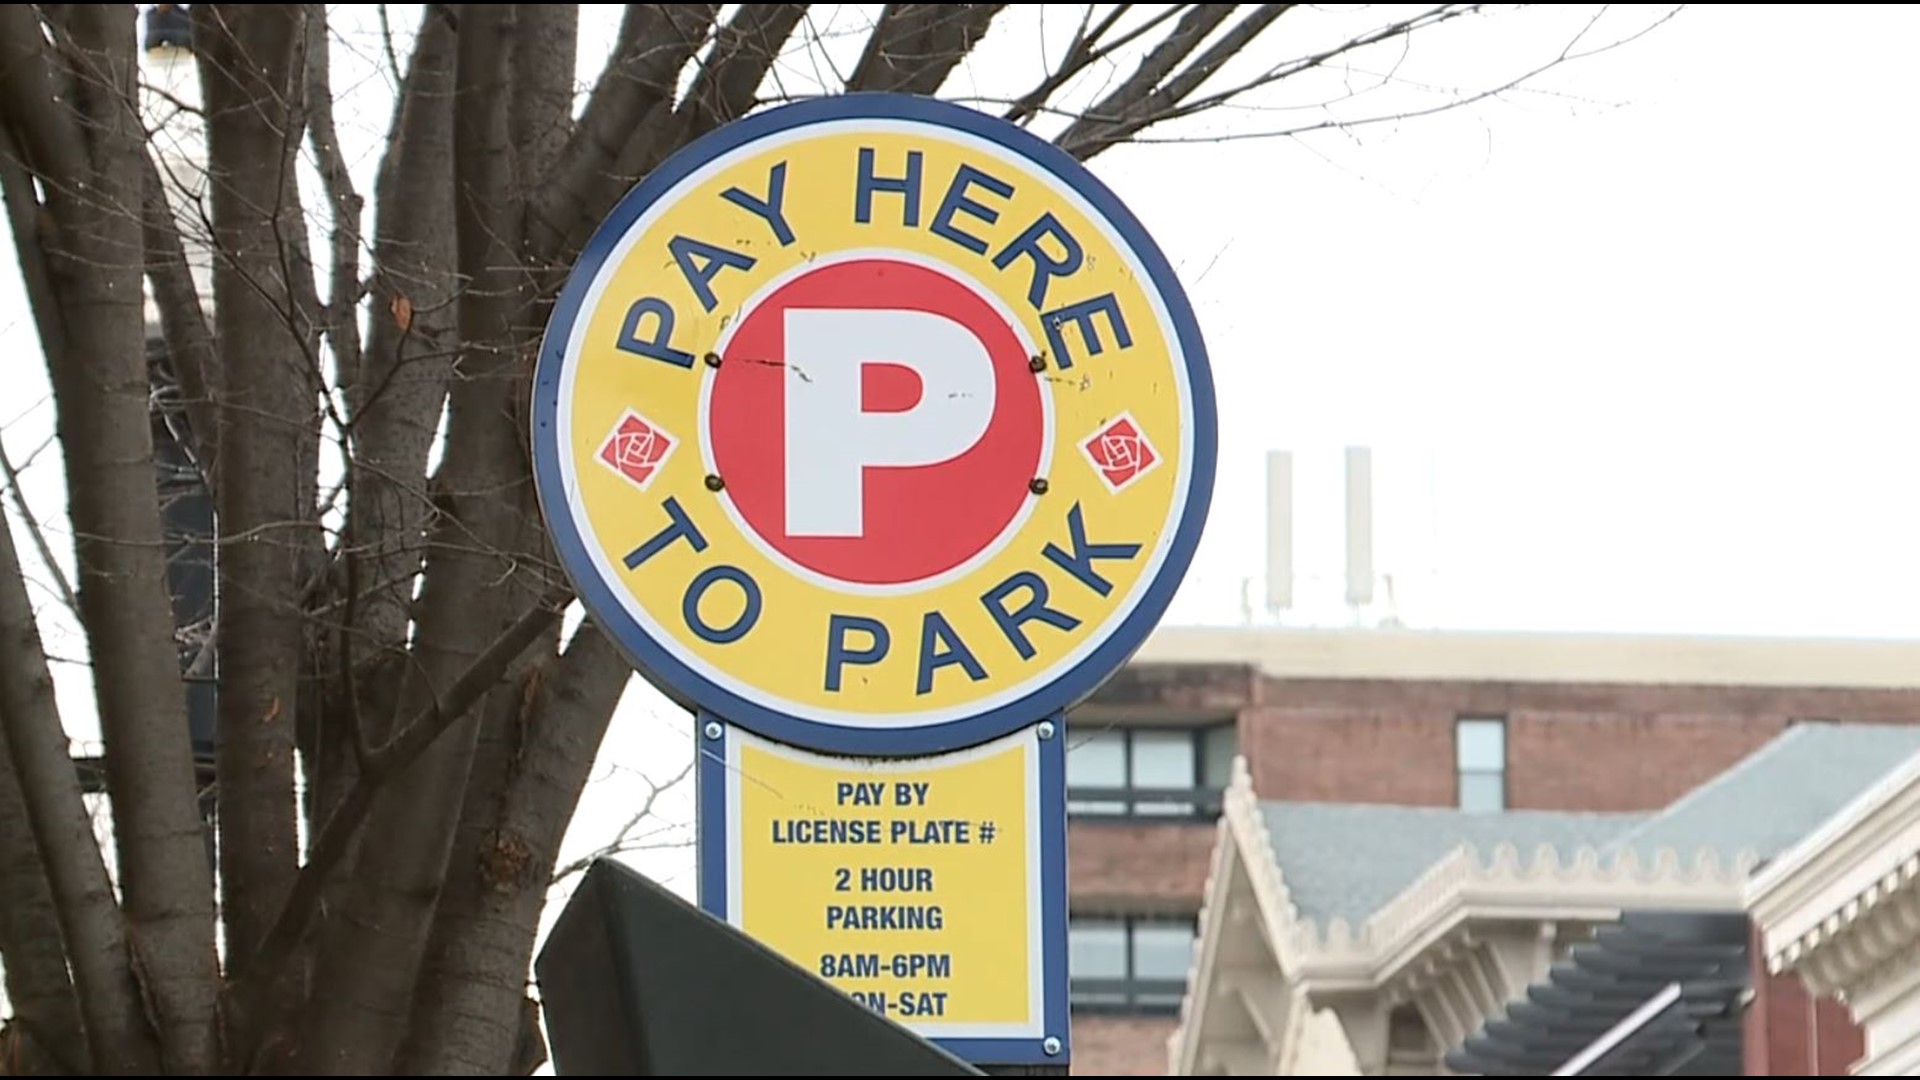 The Lancaster Parking Authority wants to raise parking rates, for the first time in 11 years, from $1.50 an hour to $2.50 an hour.